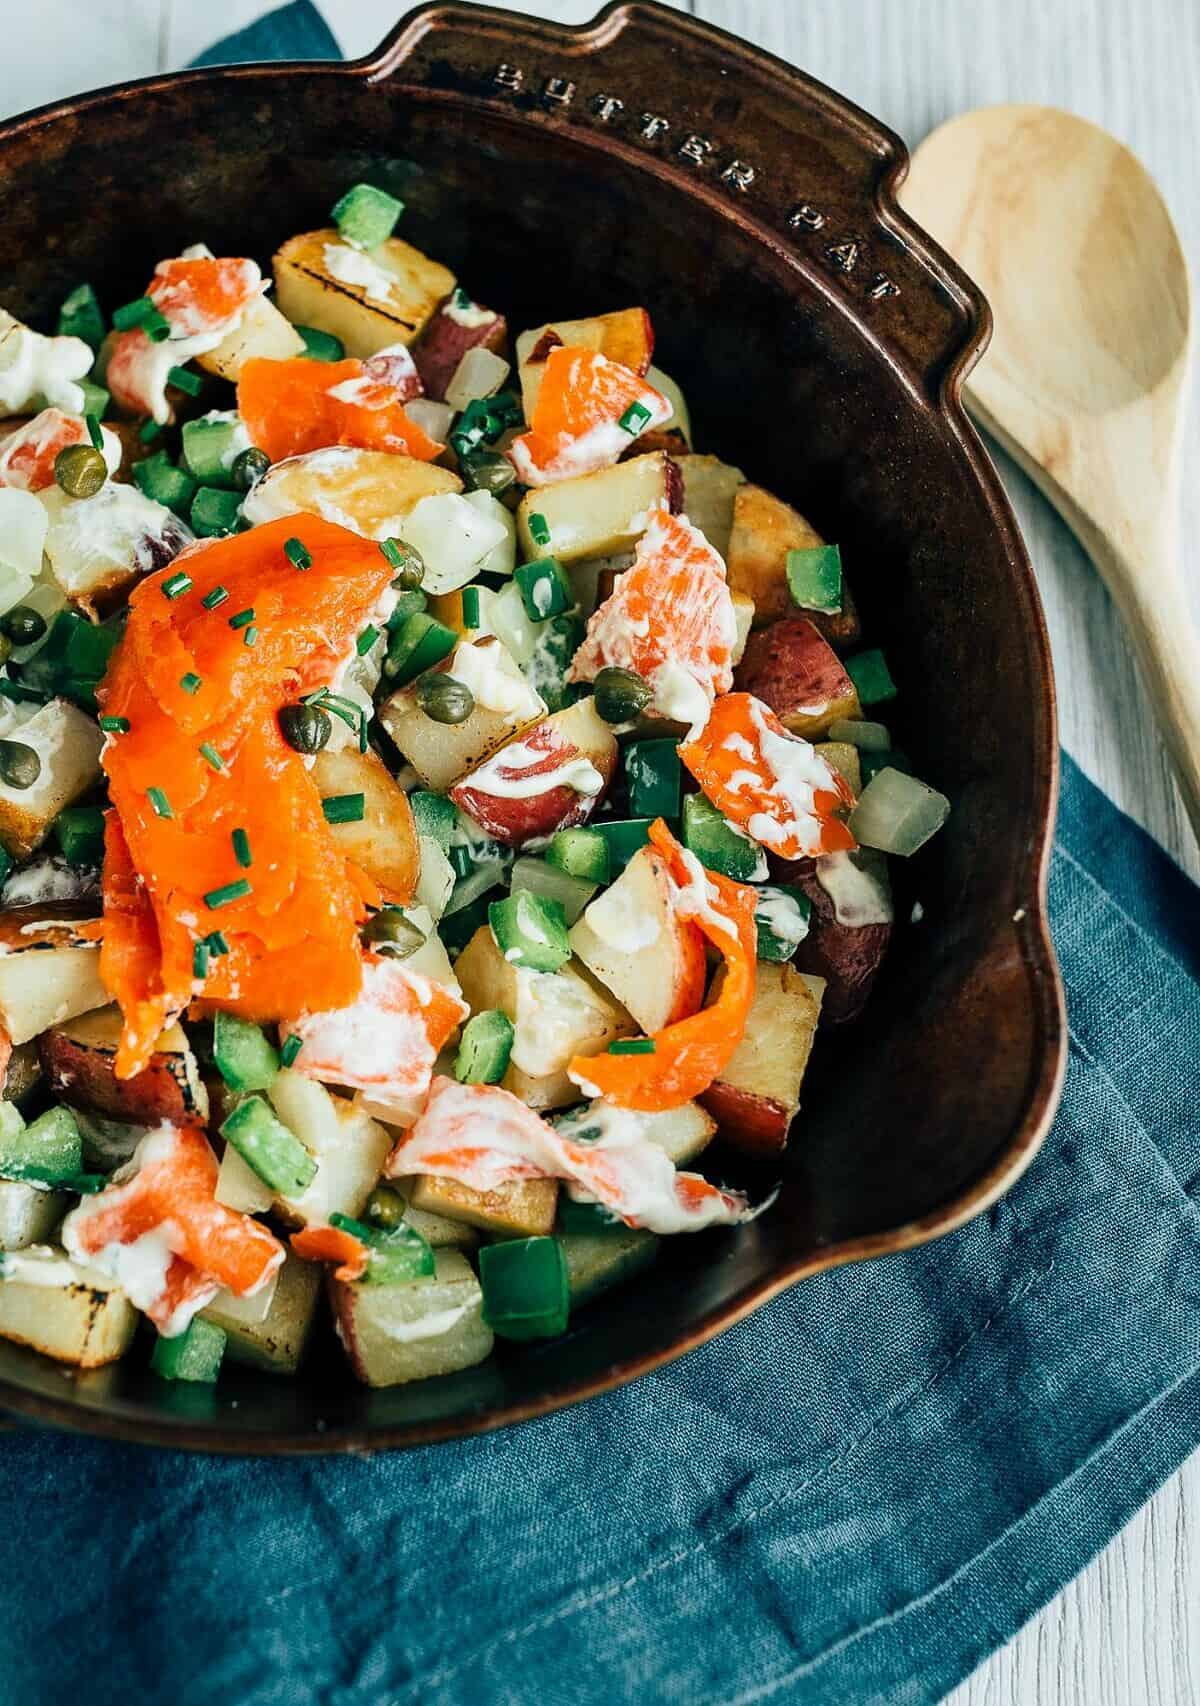  Who can resist a bed of greens with their smoked salmon hash?